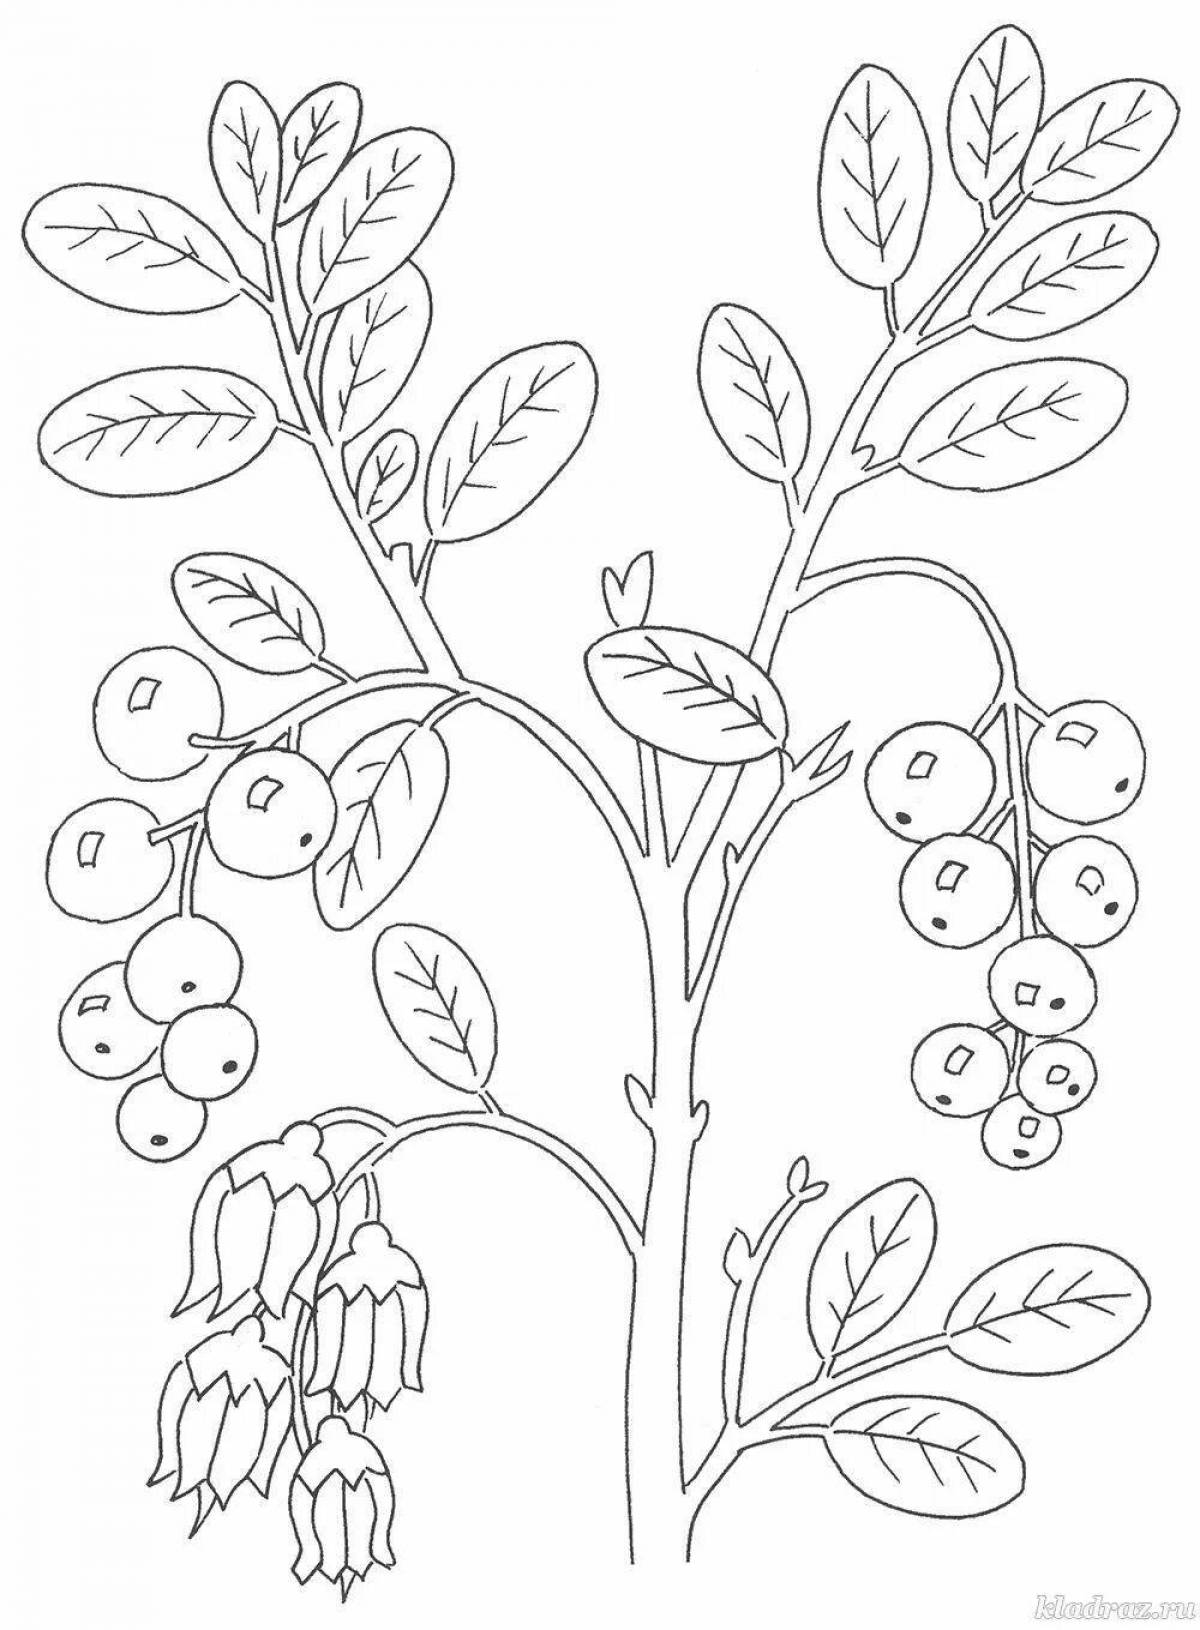 Playful rowan coloring page for kids